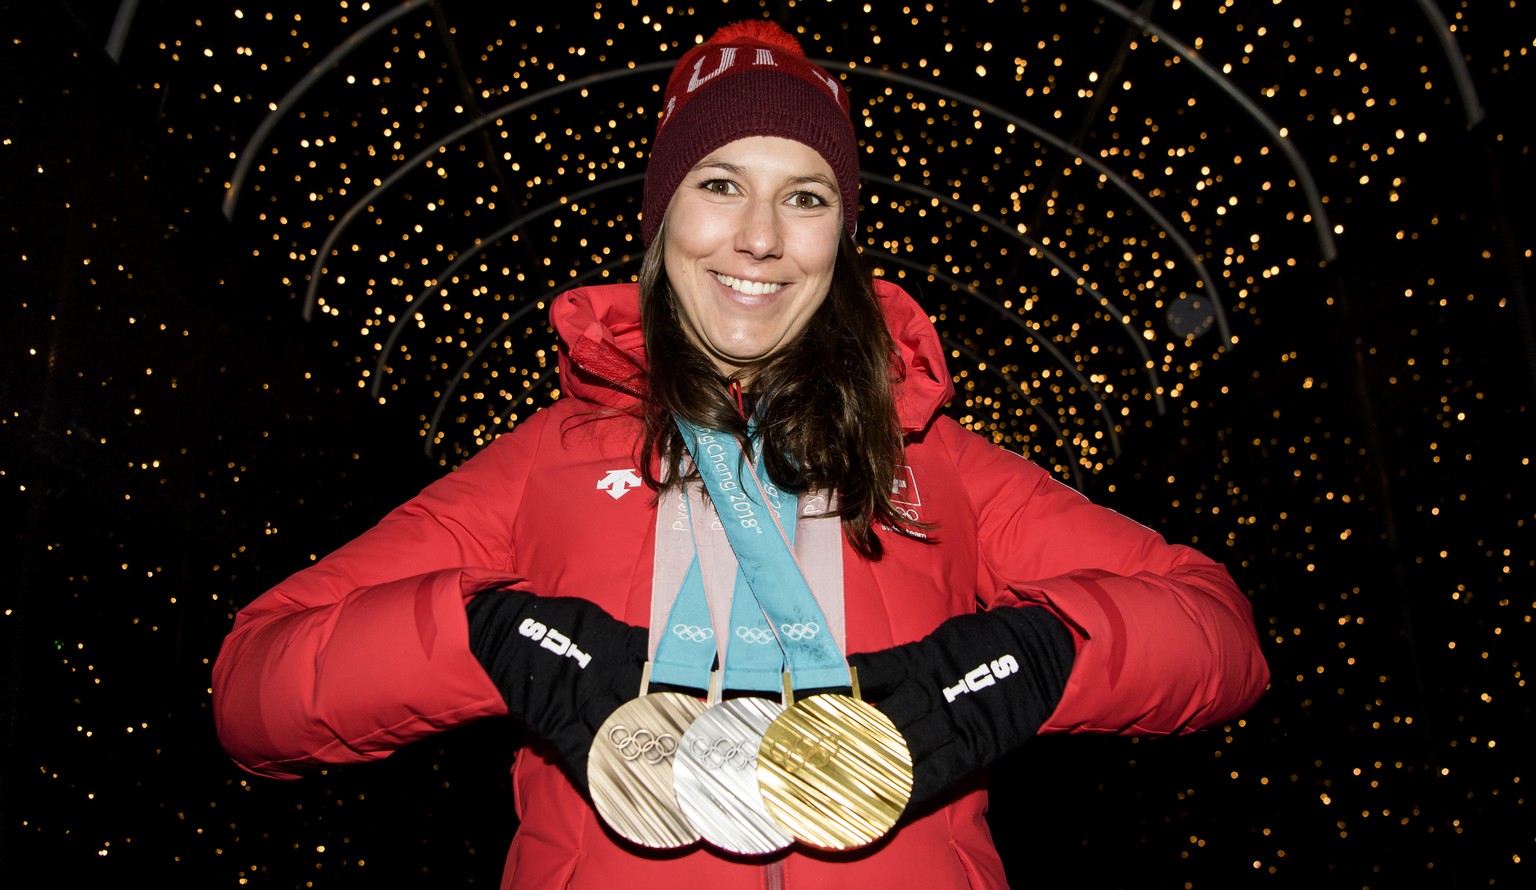 Wendy Holdener of Switzerland poses with the Gold, Silver and Bronze medals at the House of Switzerland after the Alpine Skiing Team event during the XXIII Winter Olympics 2018 in Pyeongchang, South K ...